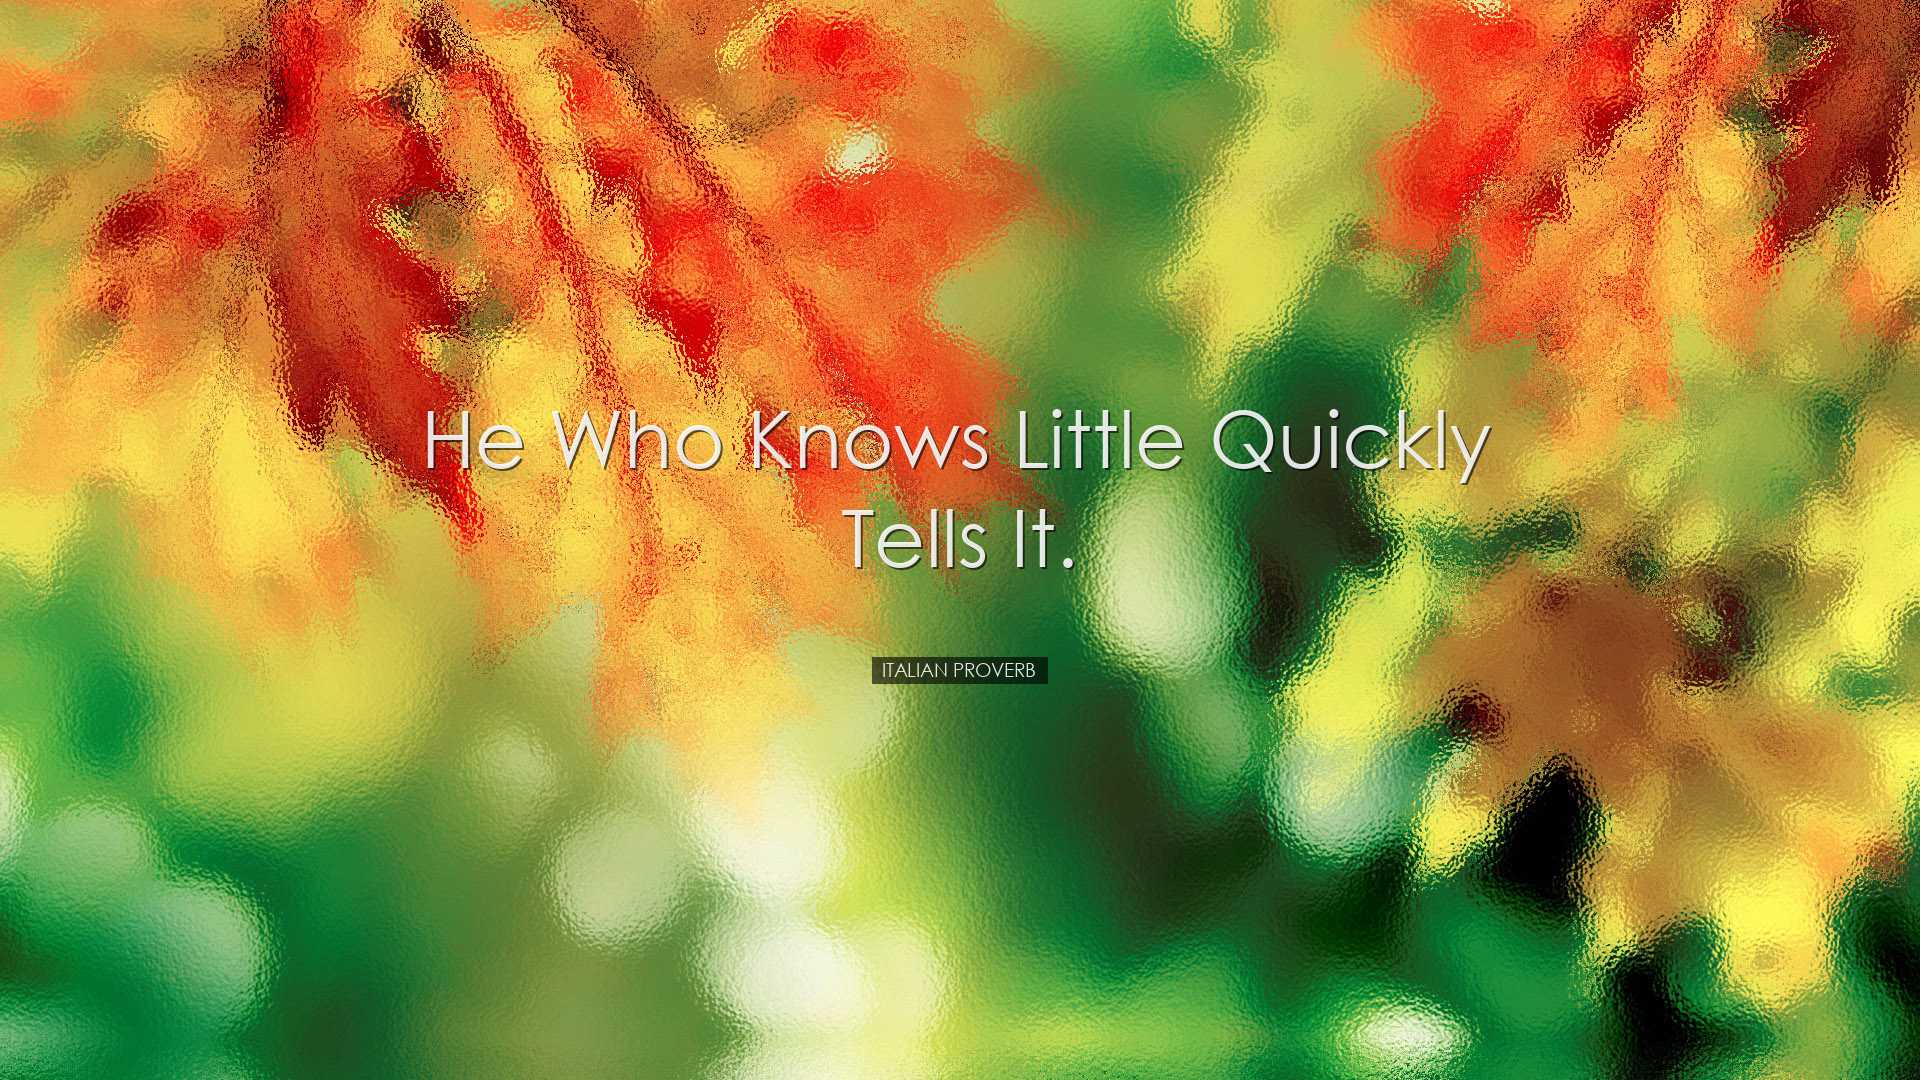 He who knows little quickly tells it. - Italian Proverb